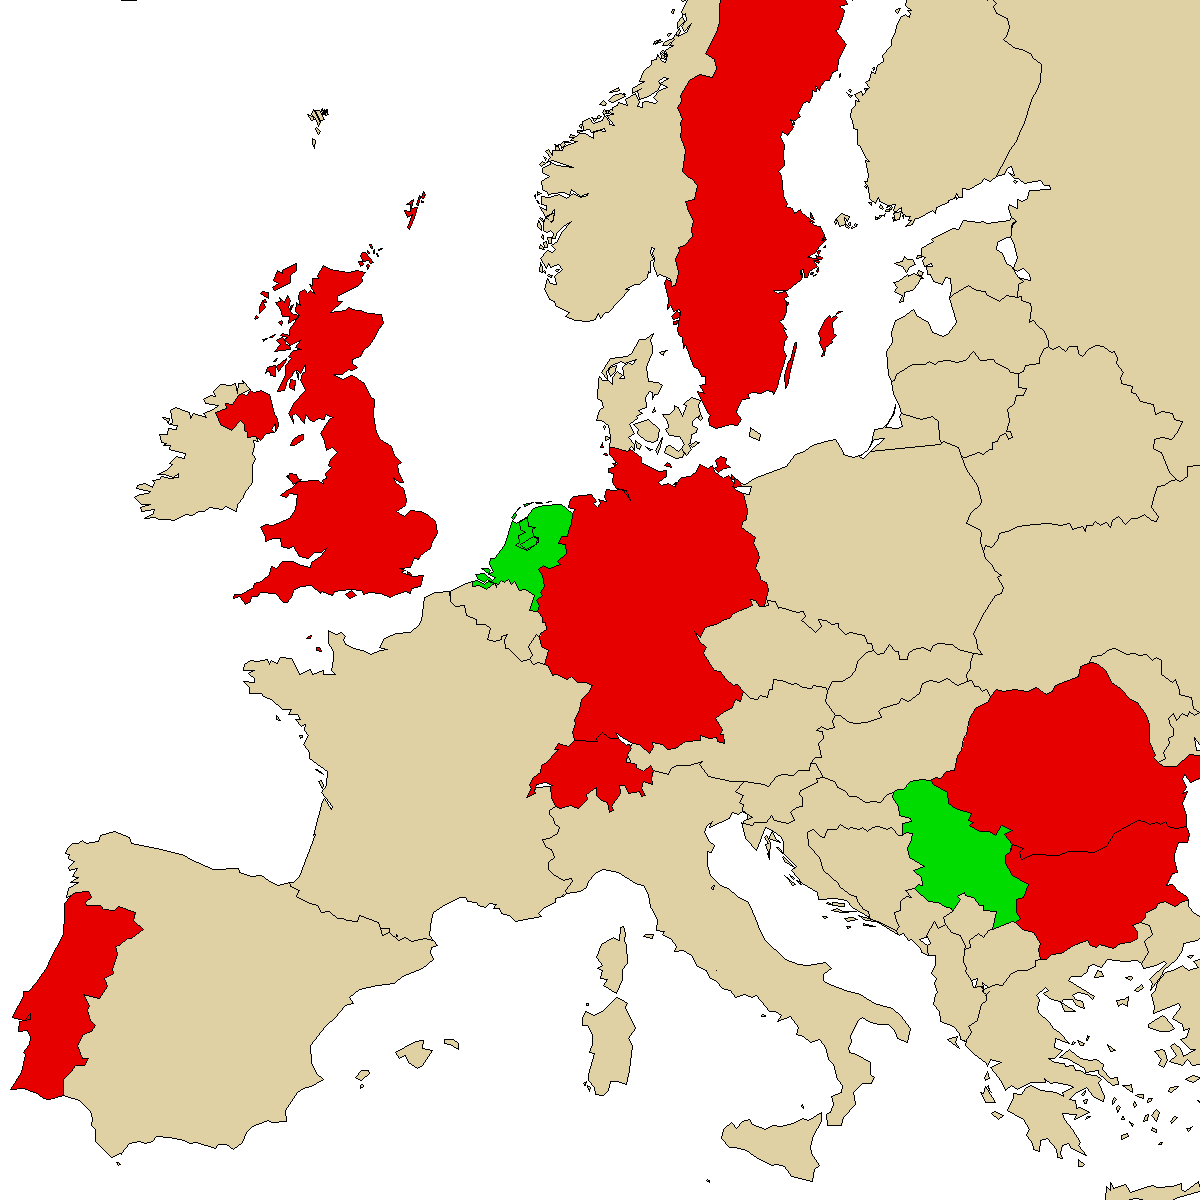 legal info map for our product NEP, green are countries where we found no ban, red with ban, grey is unknown